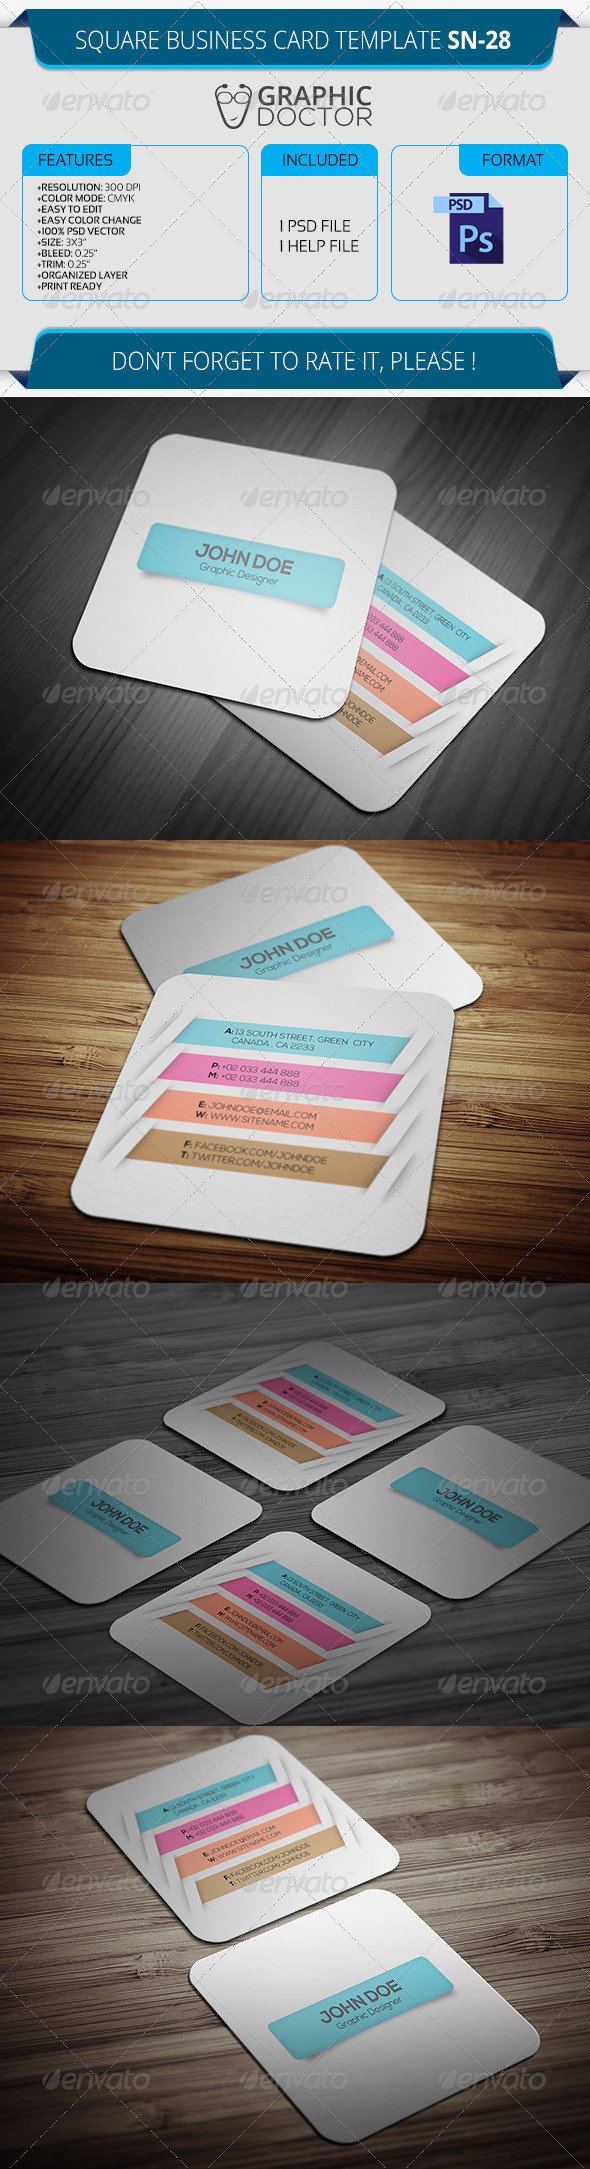 Square Business Card Template SN 28 by GraphicDoctor